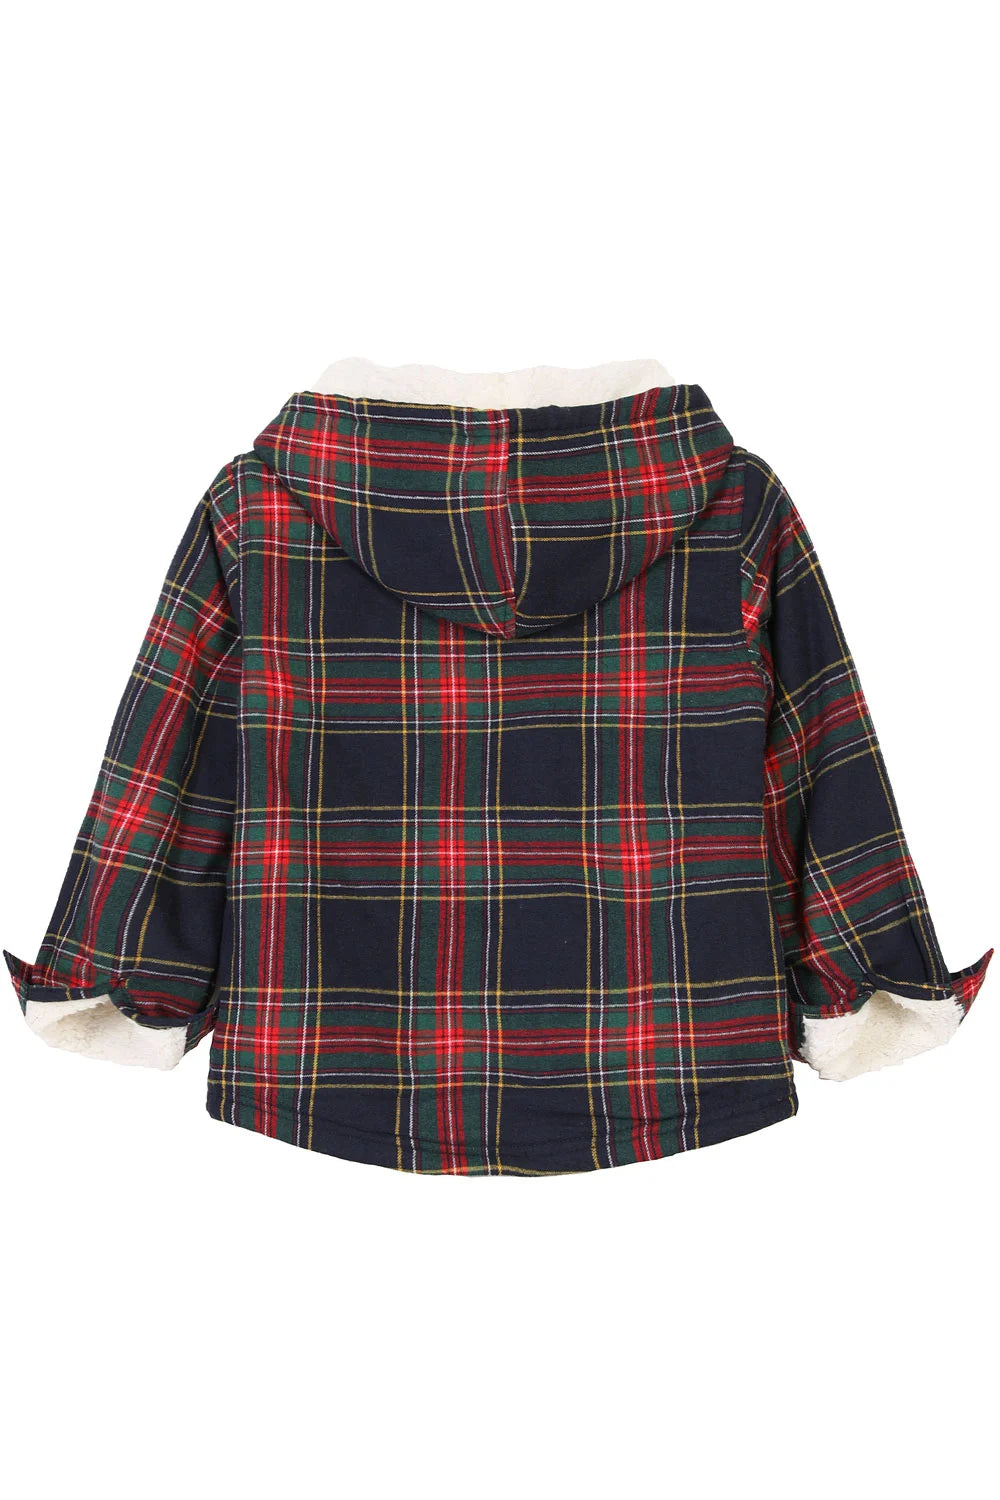 Girls Sherpa Lined Full Zip Plaid Flannel Shirt,Hooded Flannel Jacket